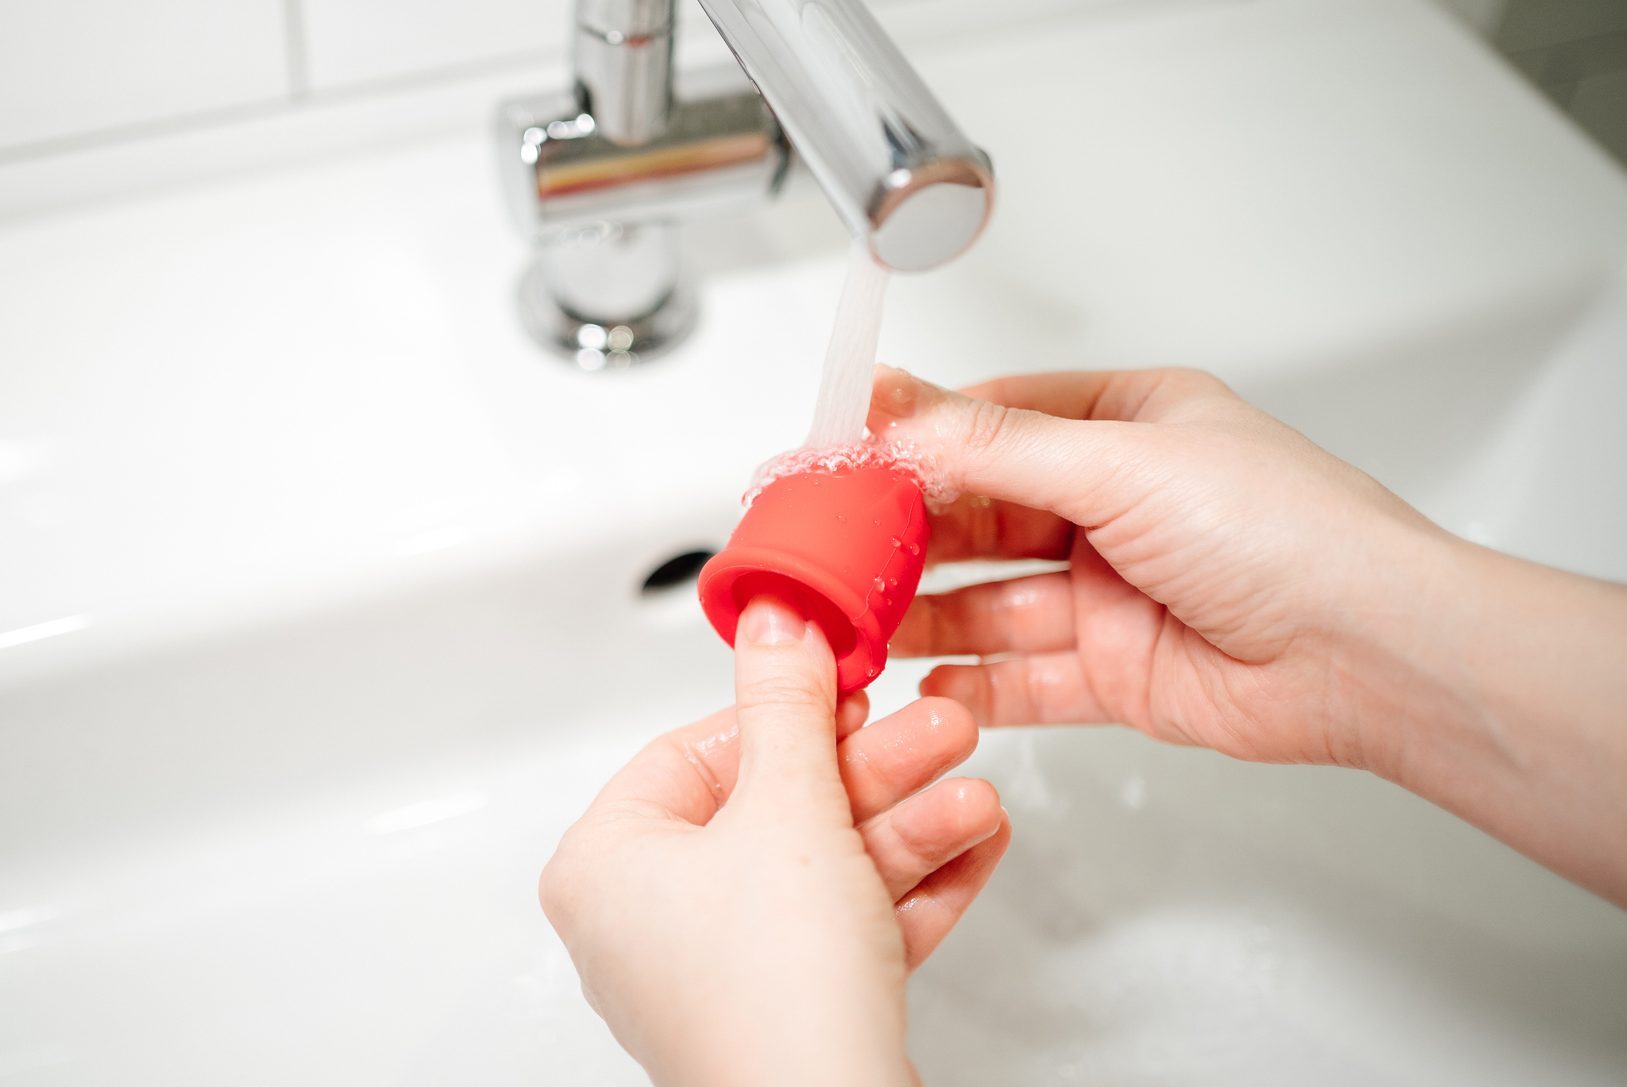 Hands of a woman washes a red menstrual cup with water under the tap at the sink. Alternative feminine hygiene product concept during menstruation.